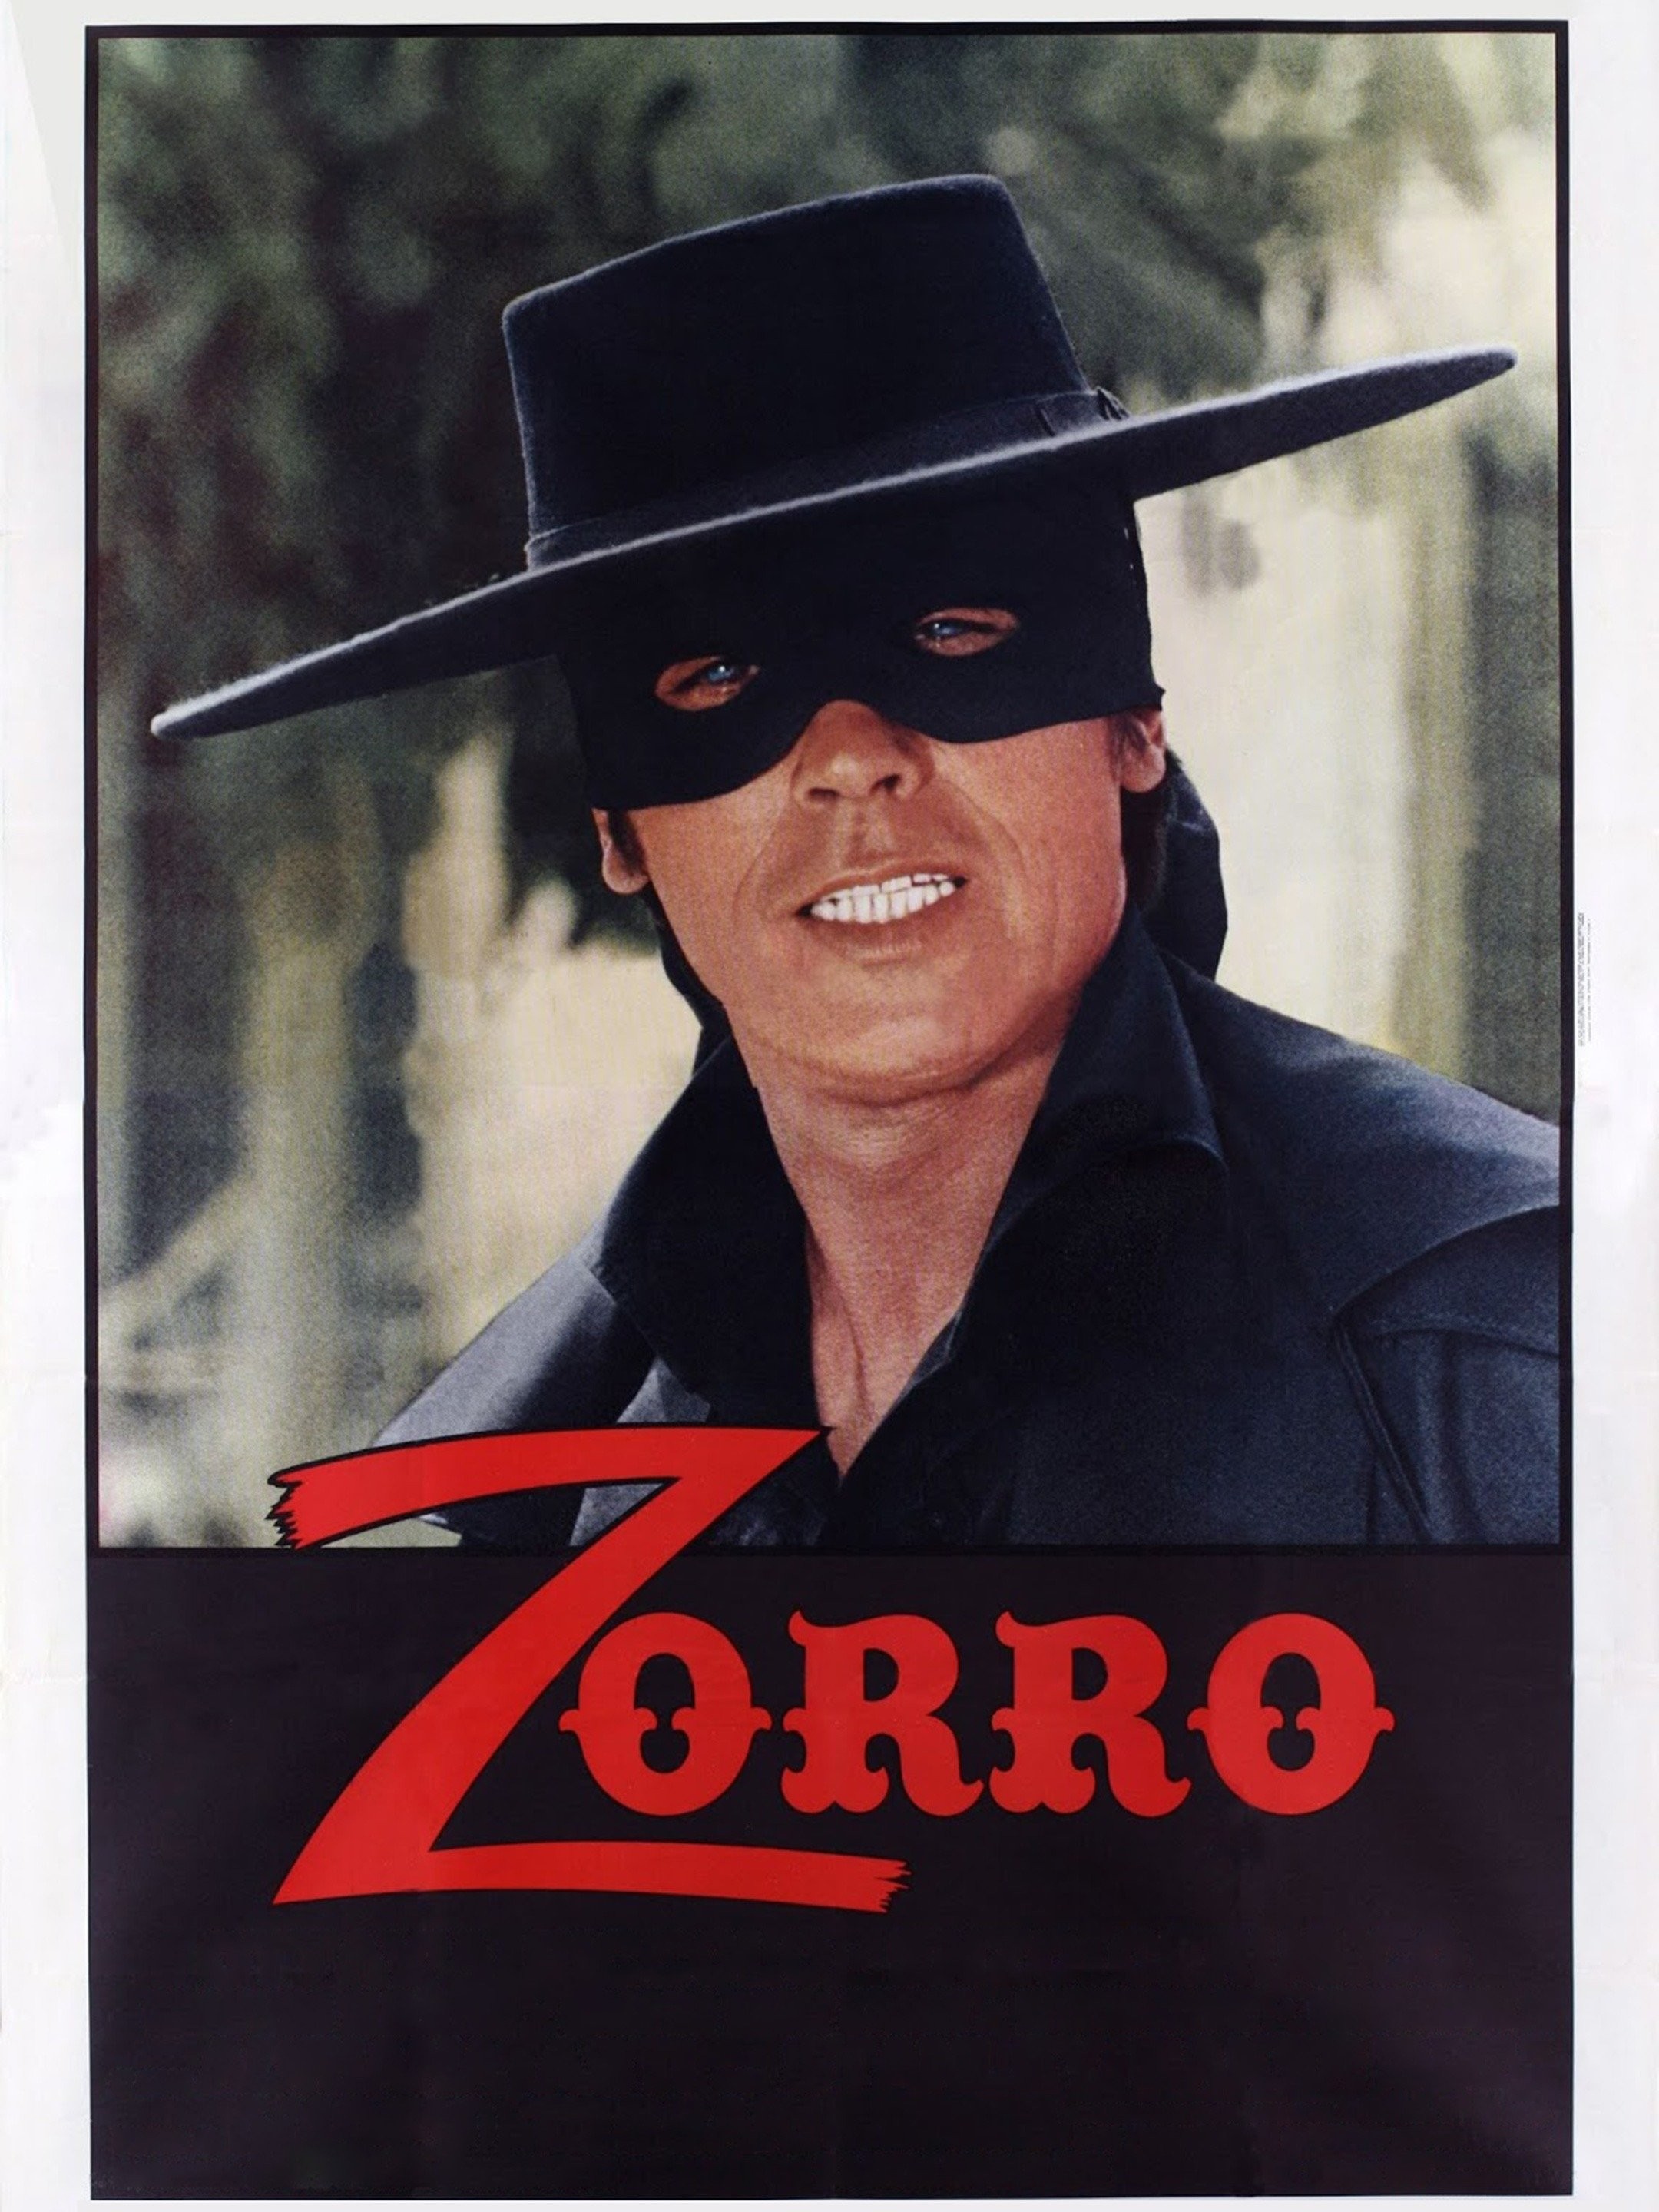 The Mask of Zorro - Where to Watch and Stream - TV Guide